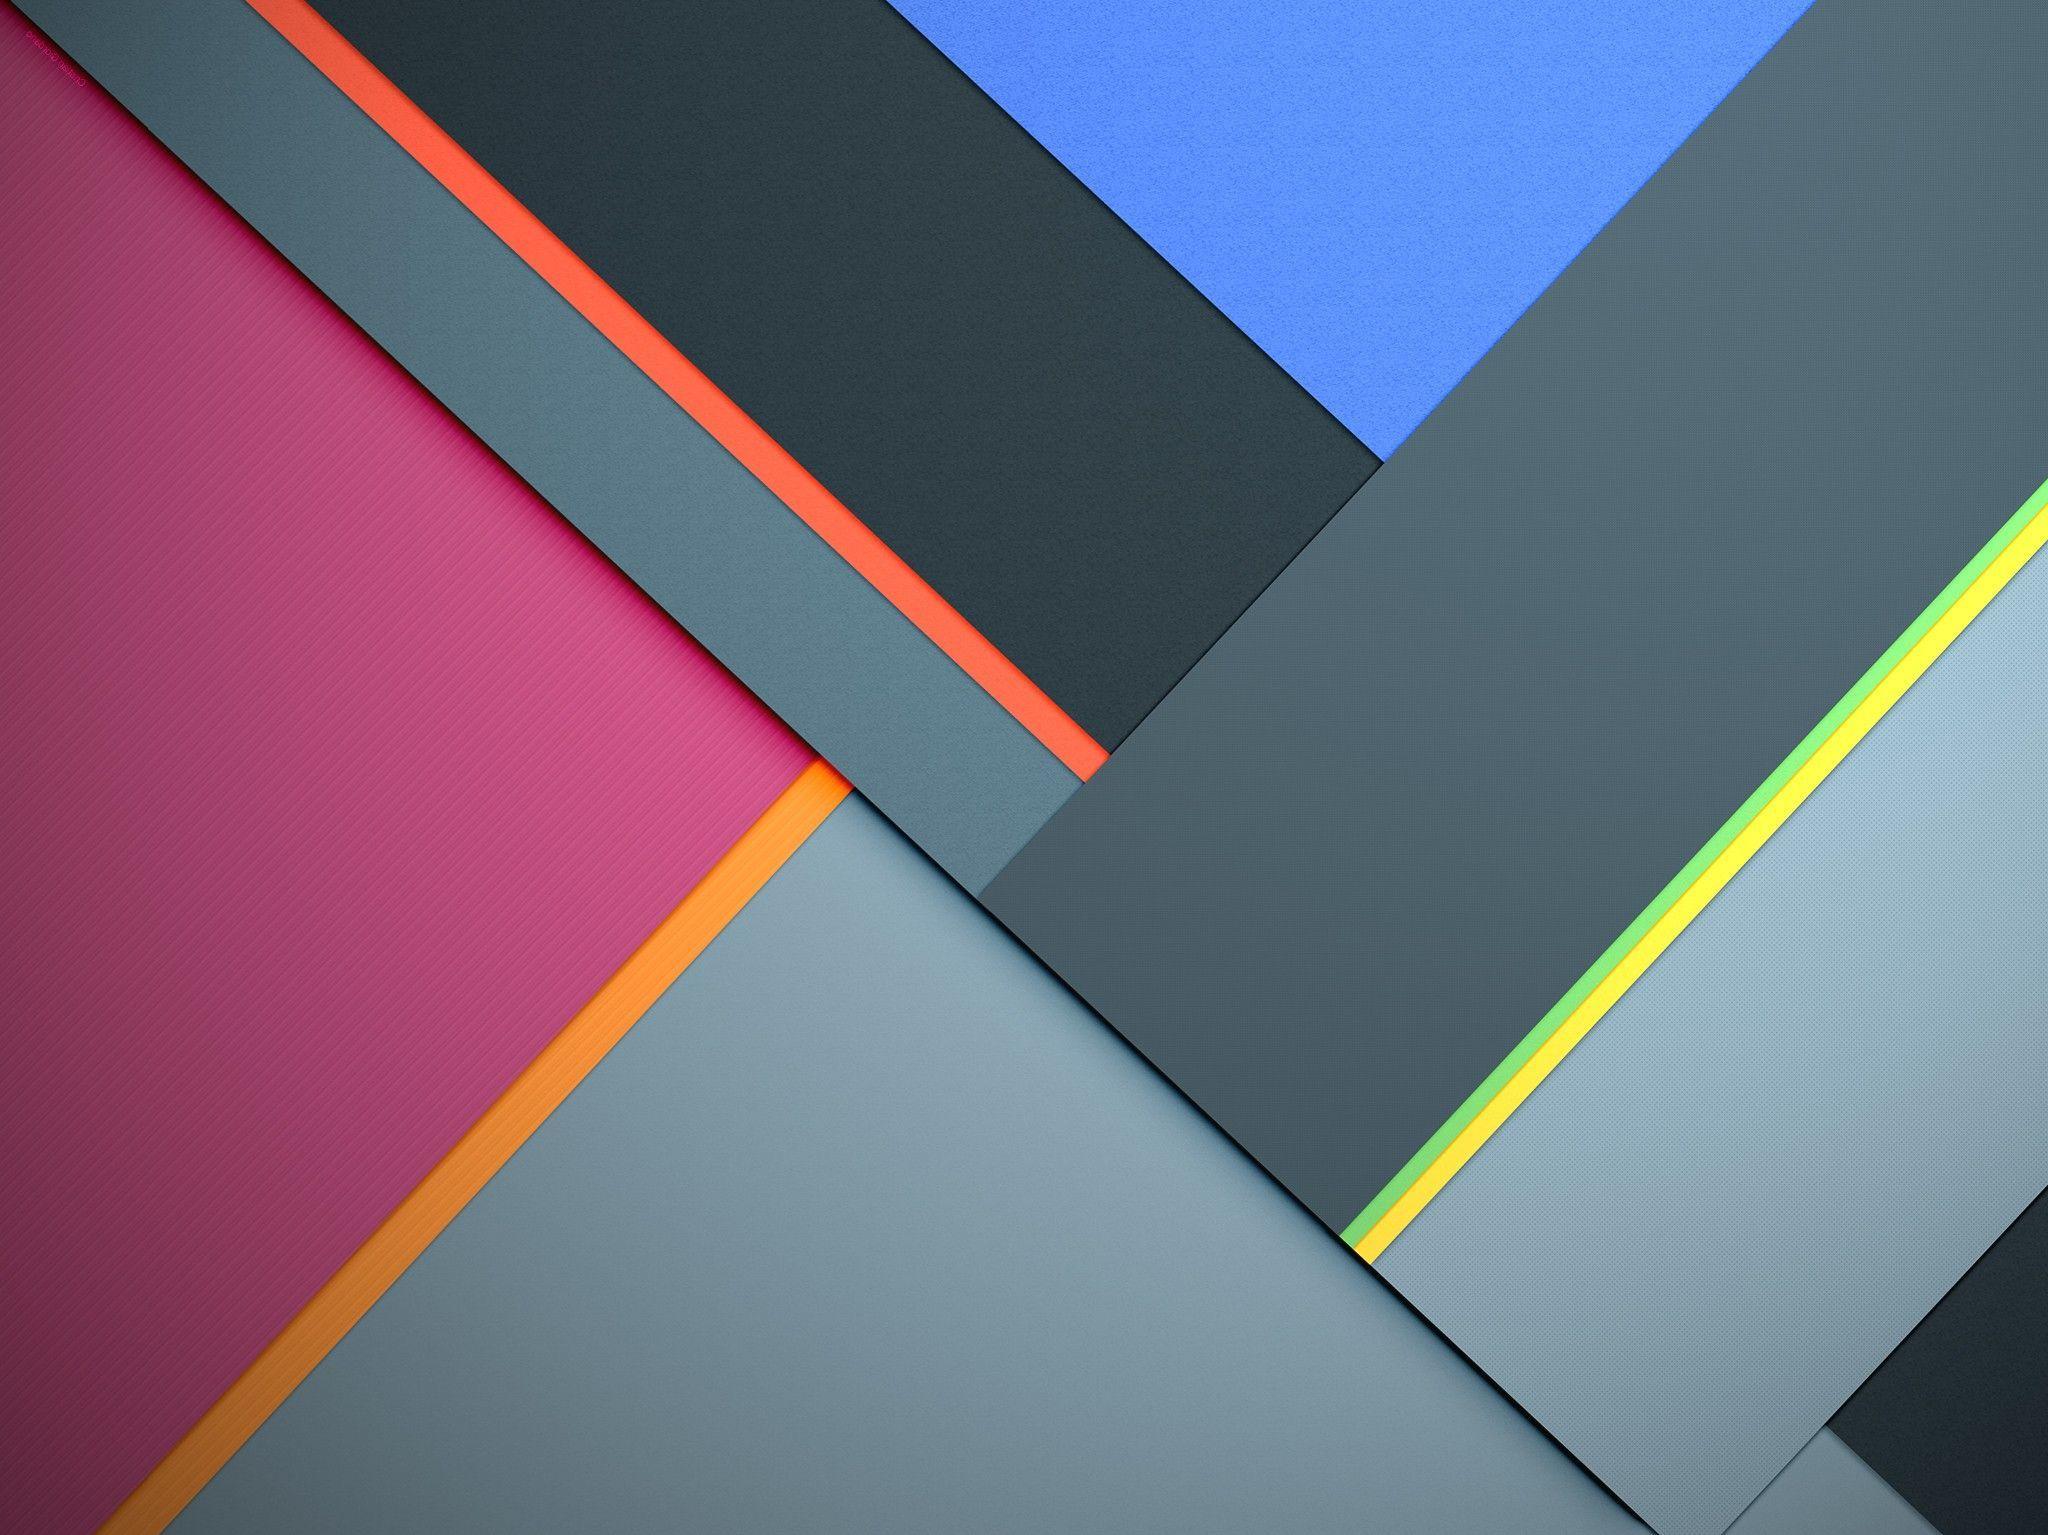 Minimalist Abstract Geometric Wallpapers - Top Free Minimalist Abstract